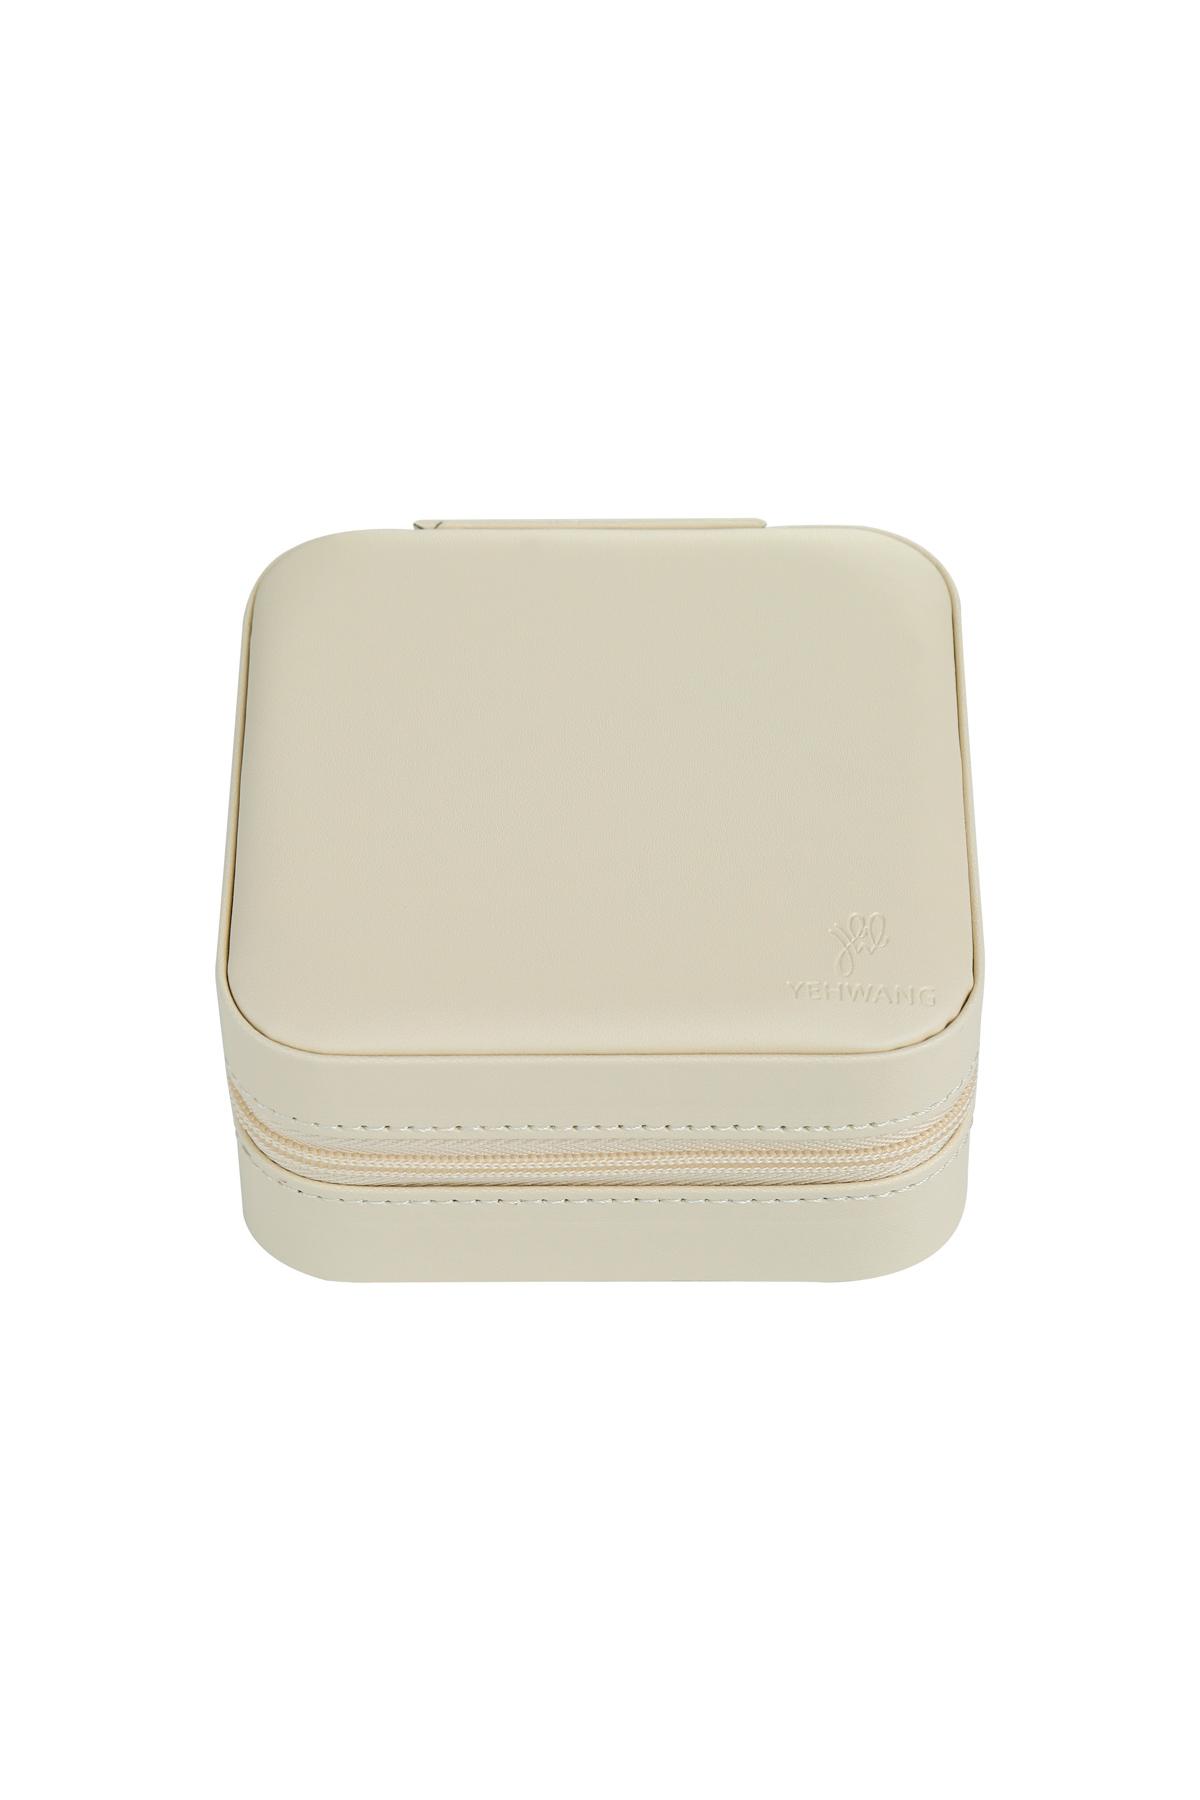 Travel kit On the Road Beige PU 